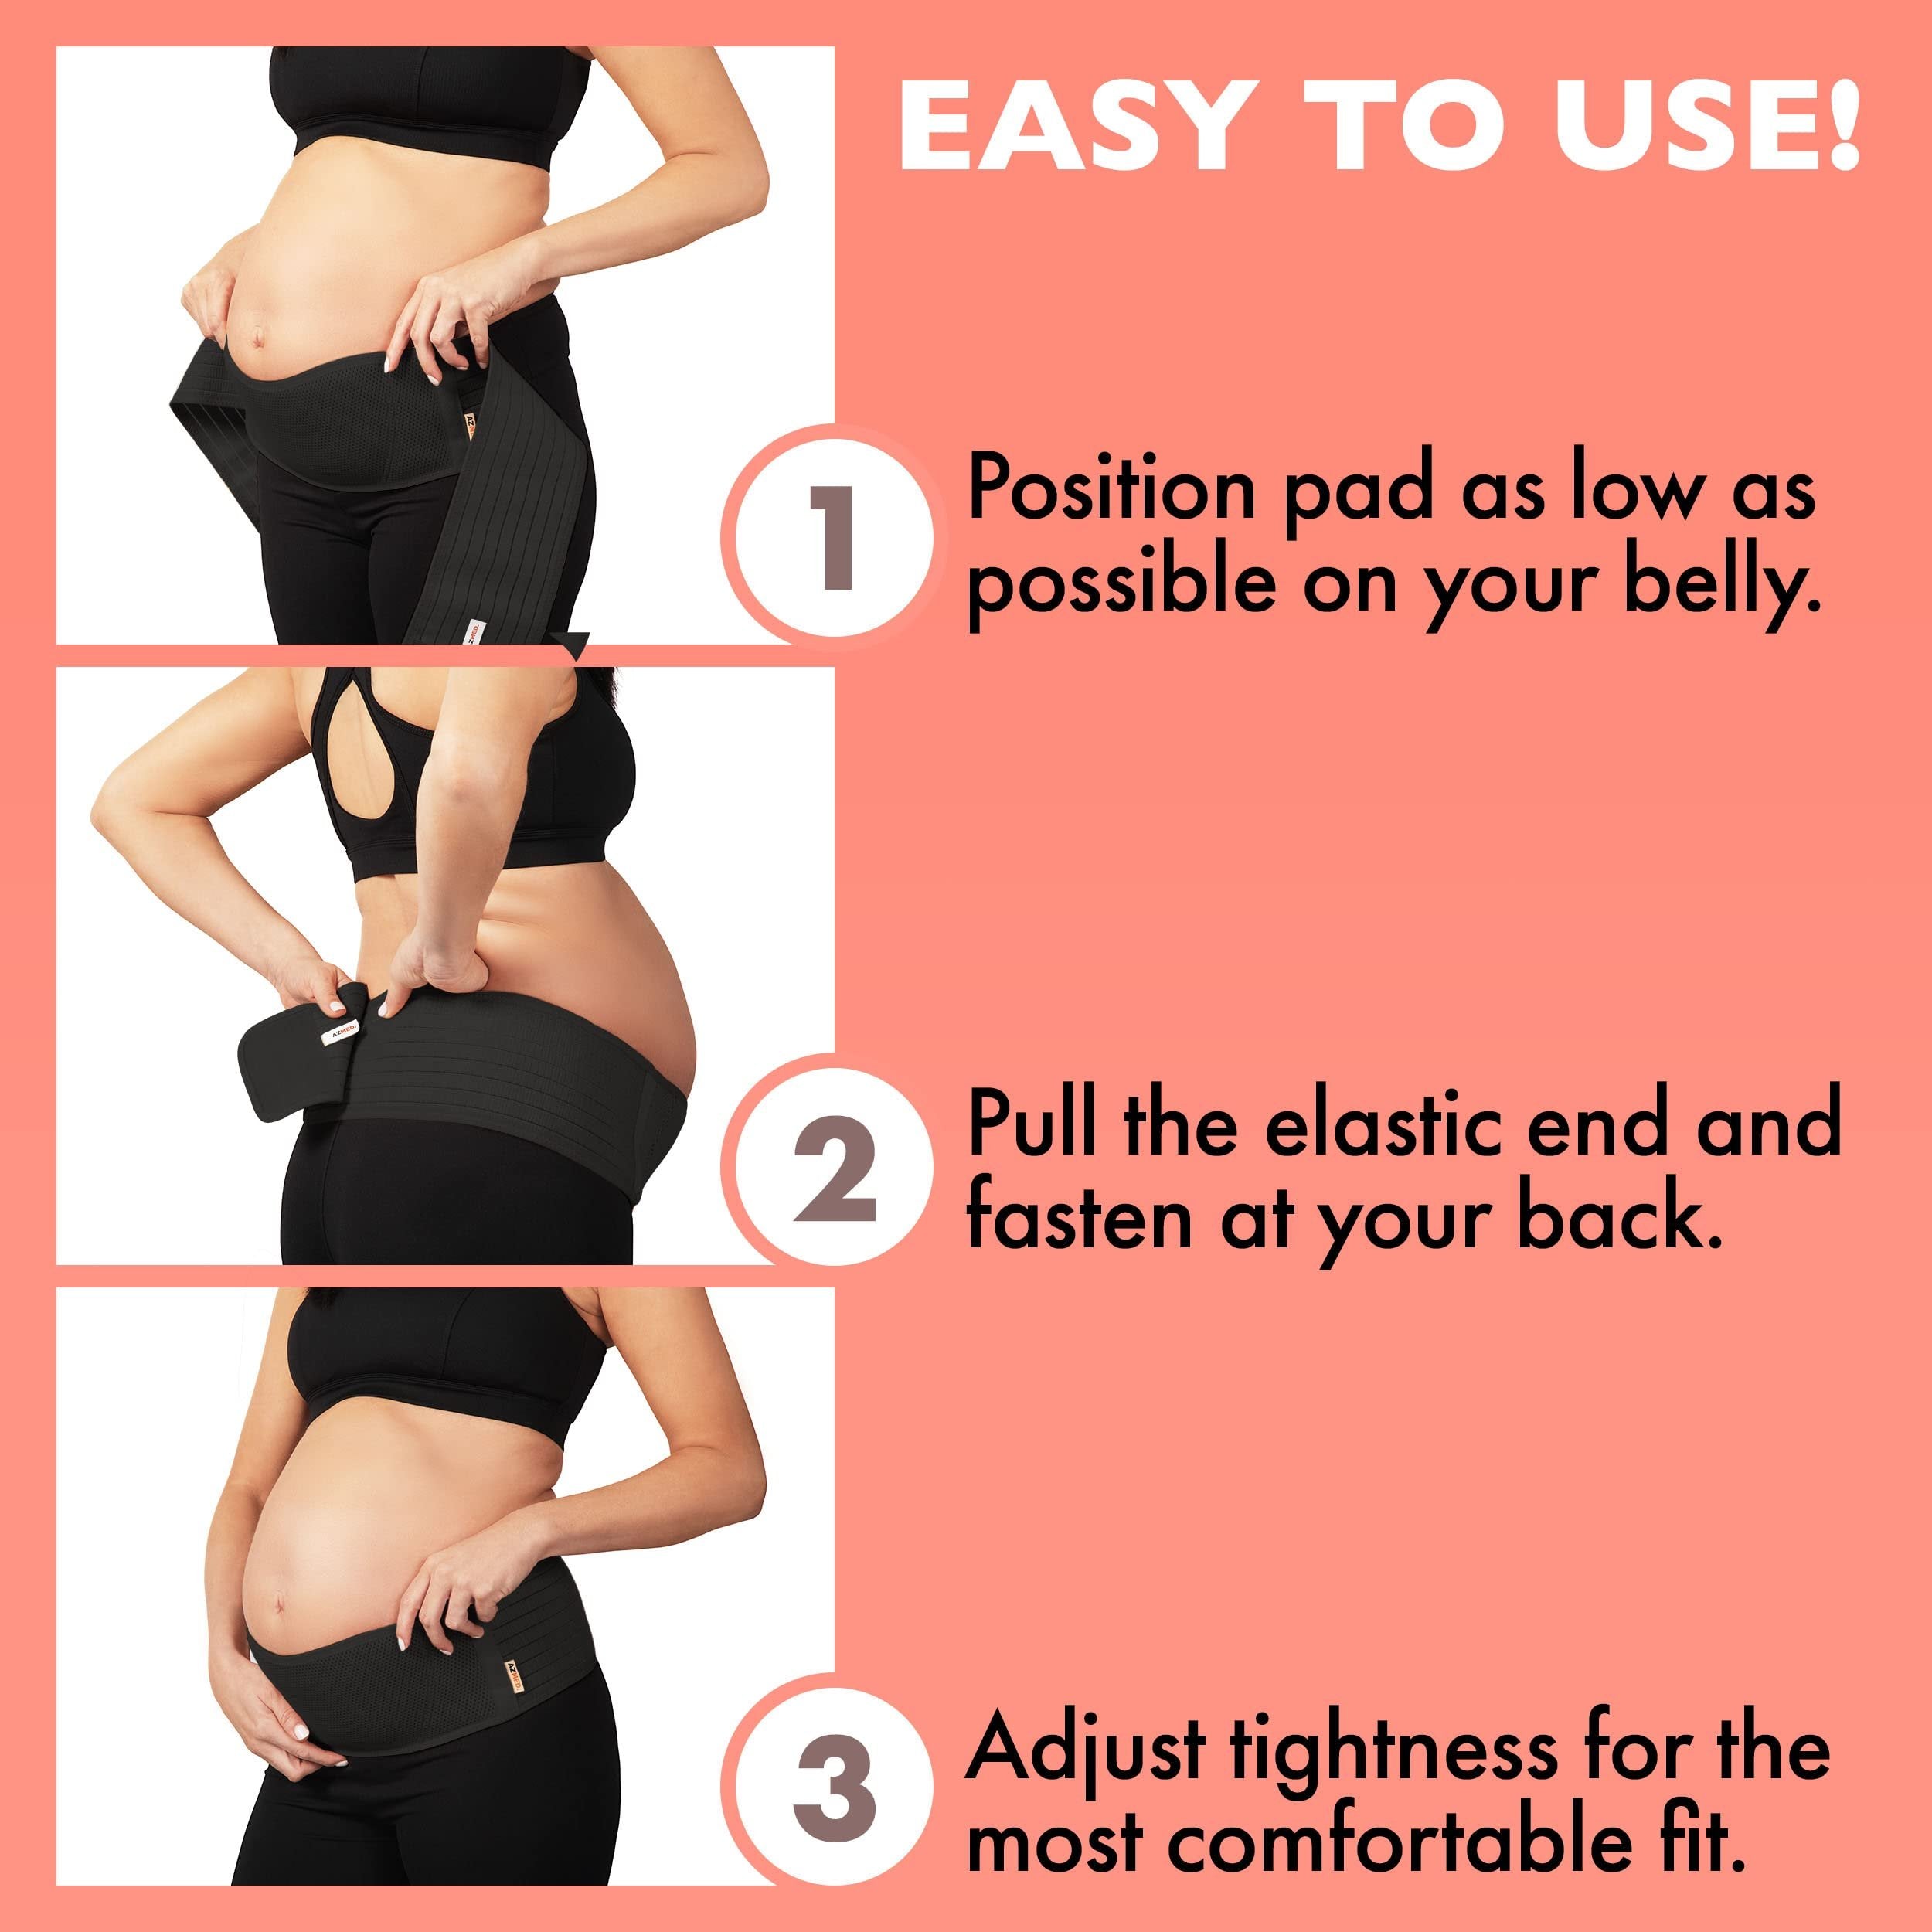 AZMED Maternity Belly Band | Breathable Pregnancy Support for Abdomen, Pelvic, & Back Pain | Adjustable Belt for All Stages (Black, One Size) - Free Shipping & Returns